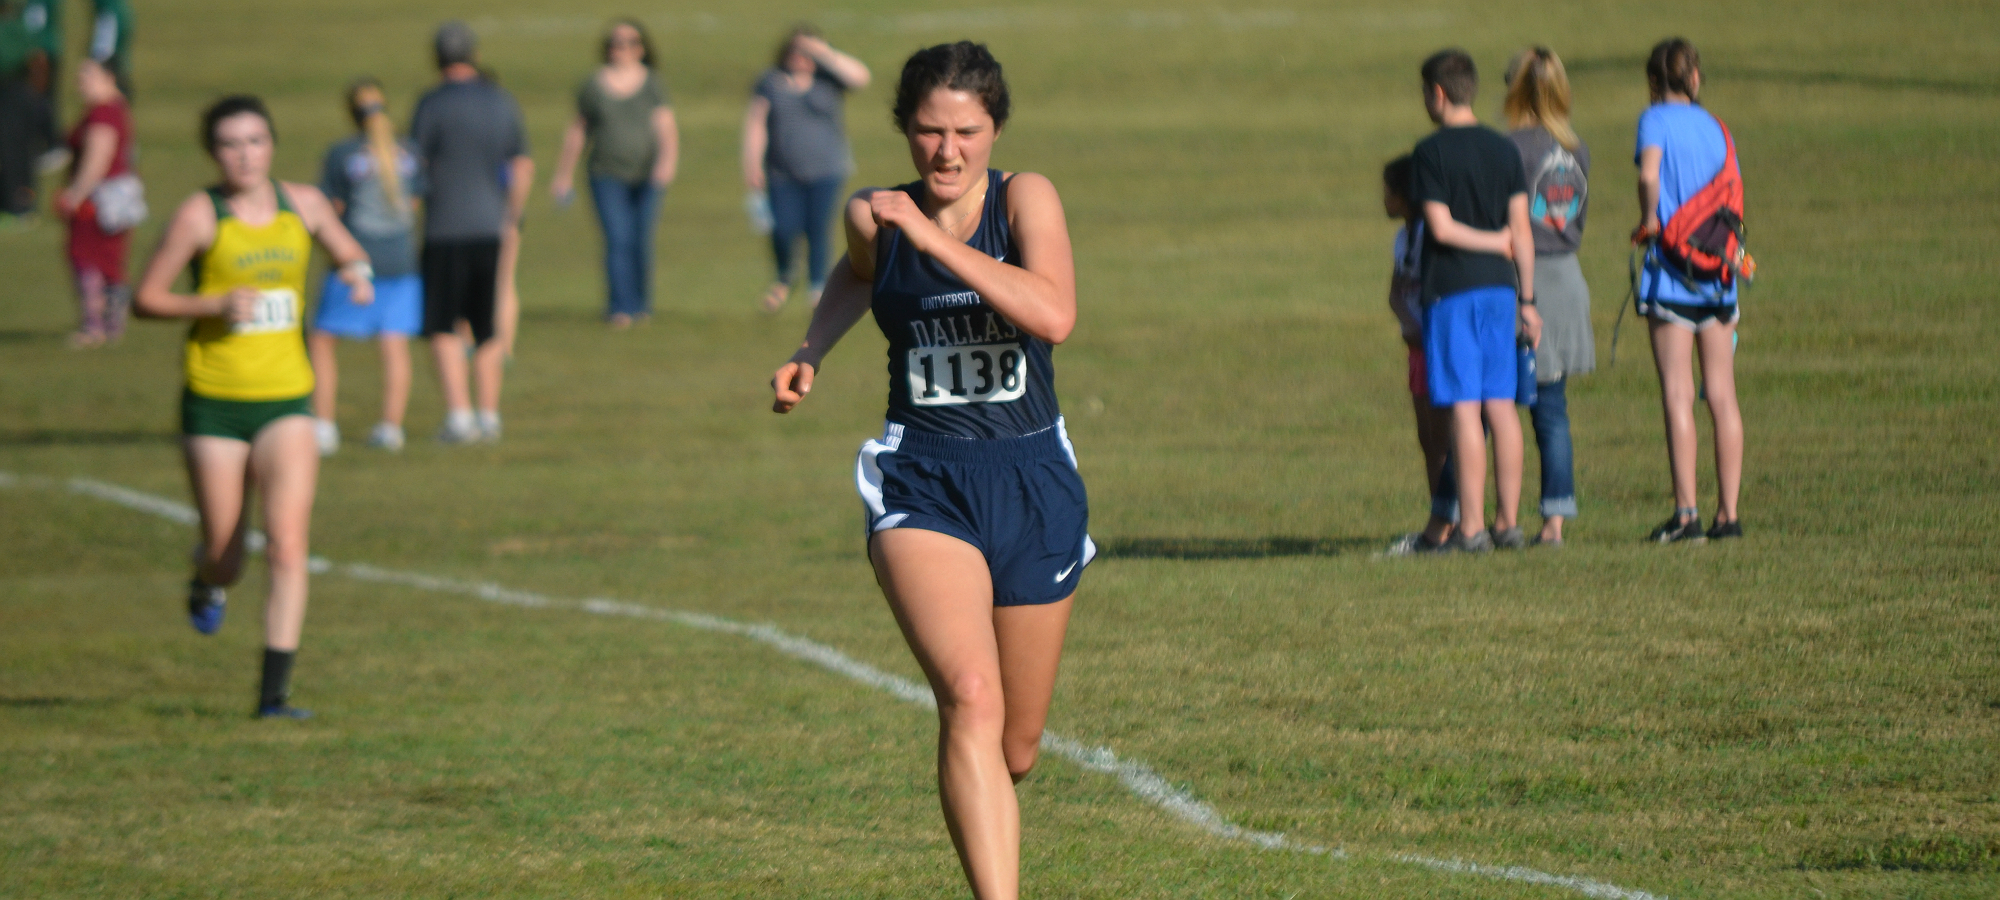 Women's Cross Country compiled Strong Effort for 3rd at Ozarks Invitational